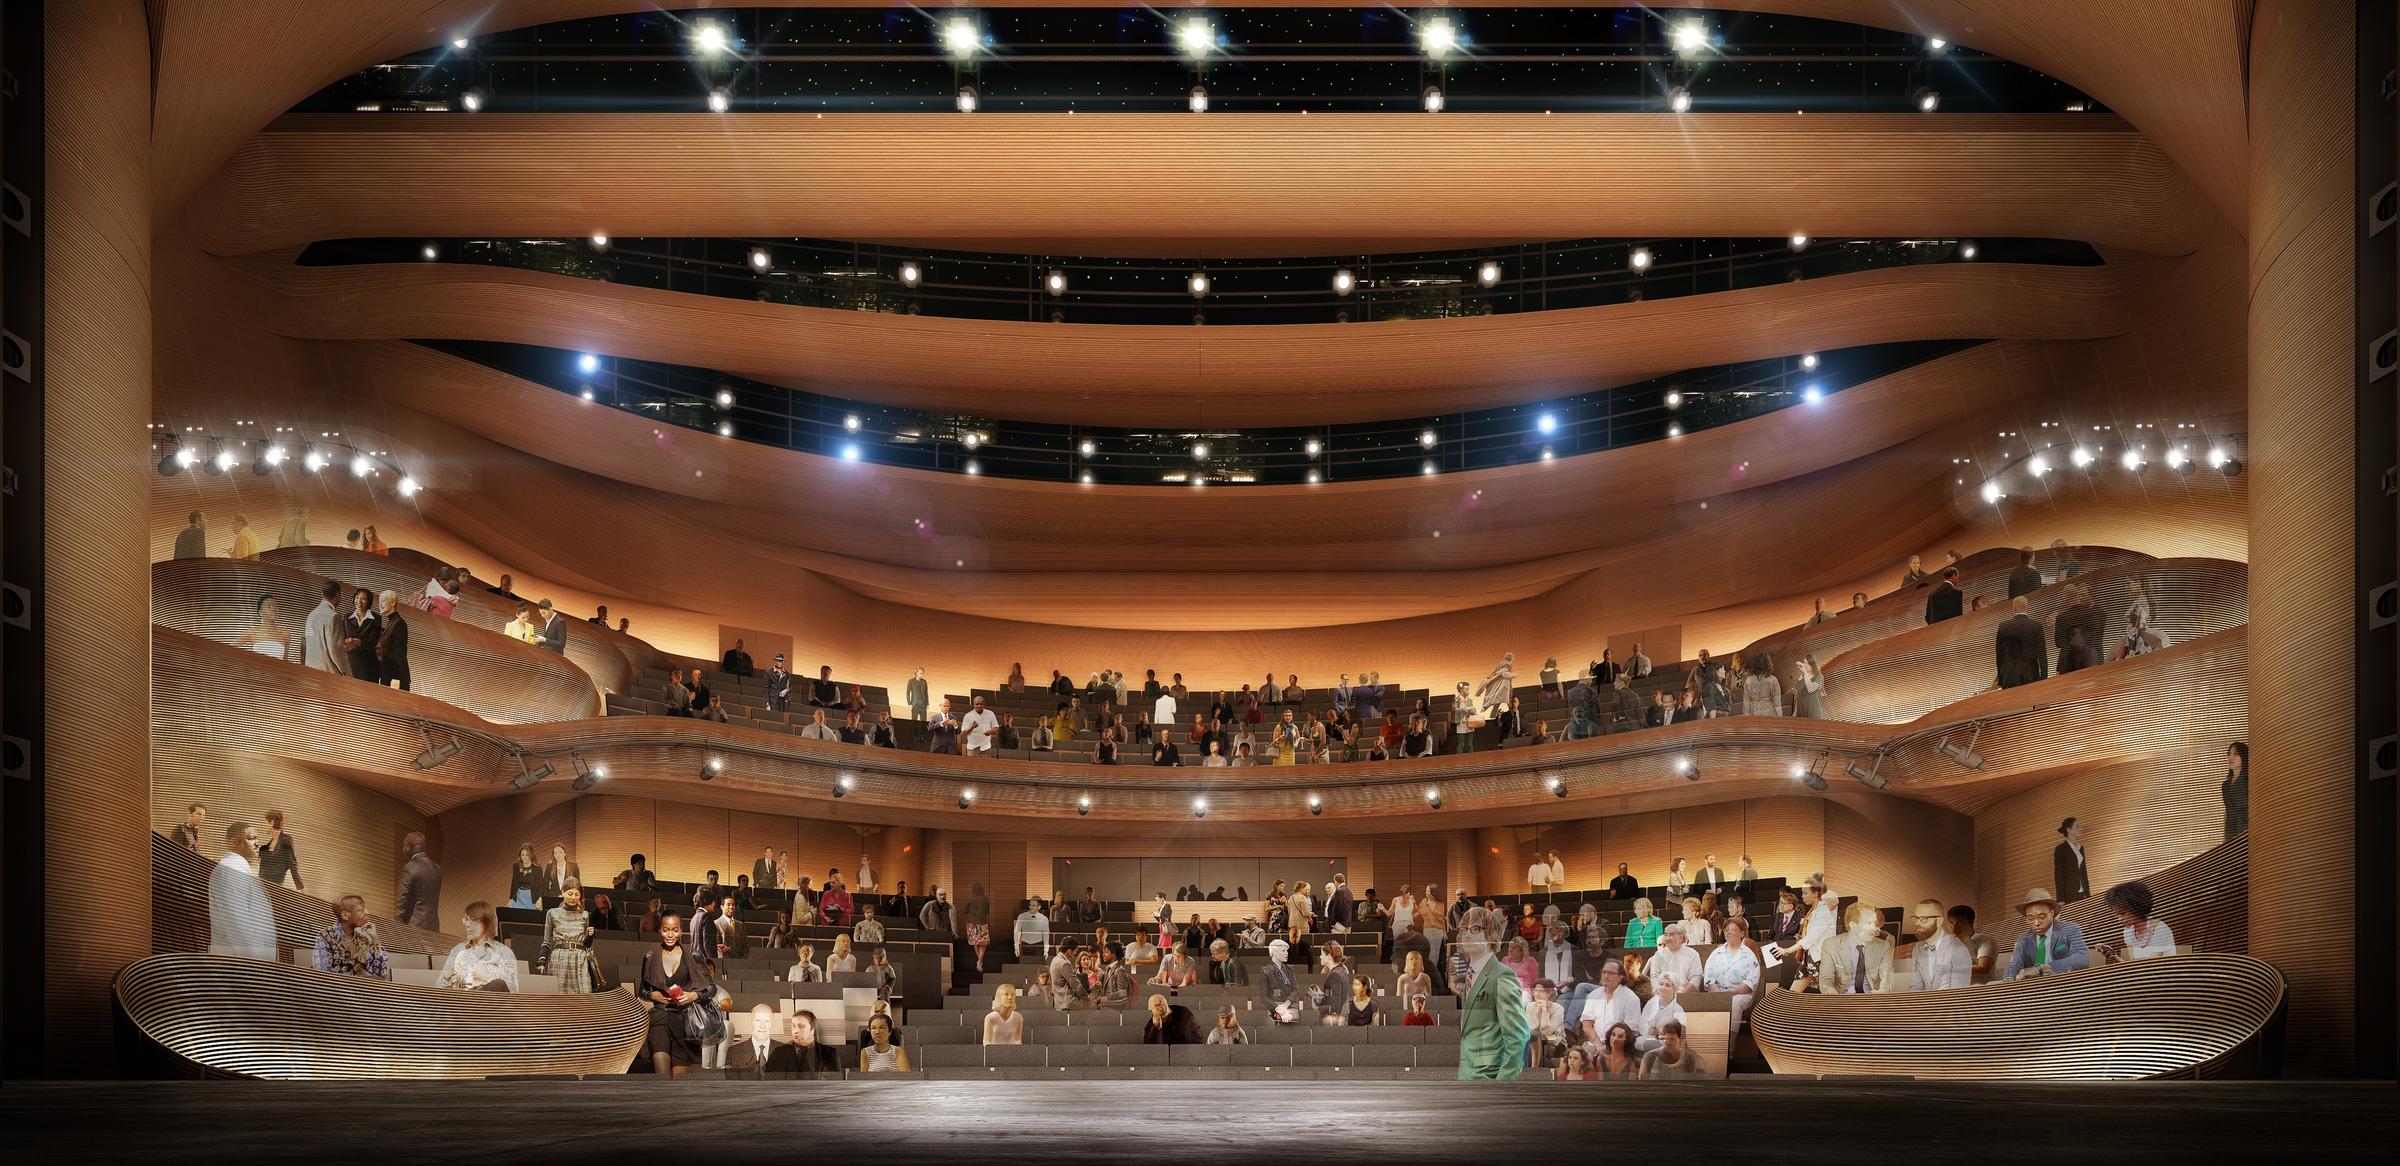 Alliance Theatre Redesign To Improve Acoustics, Accessibility WABE 90